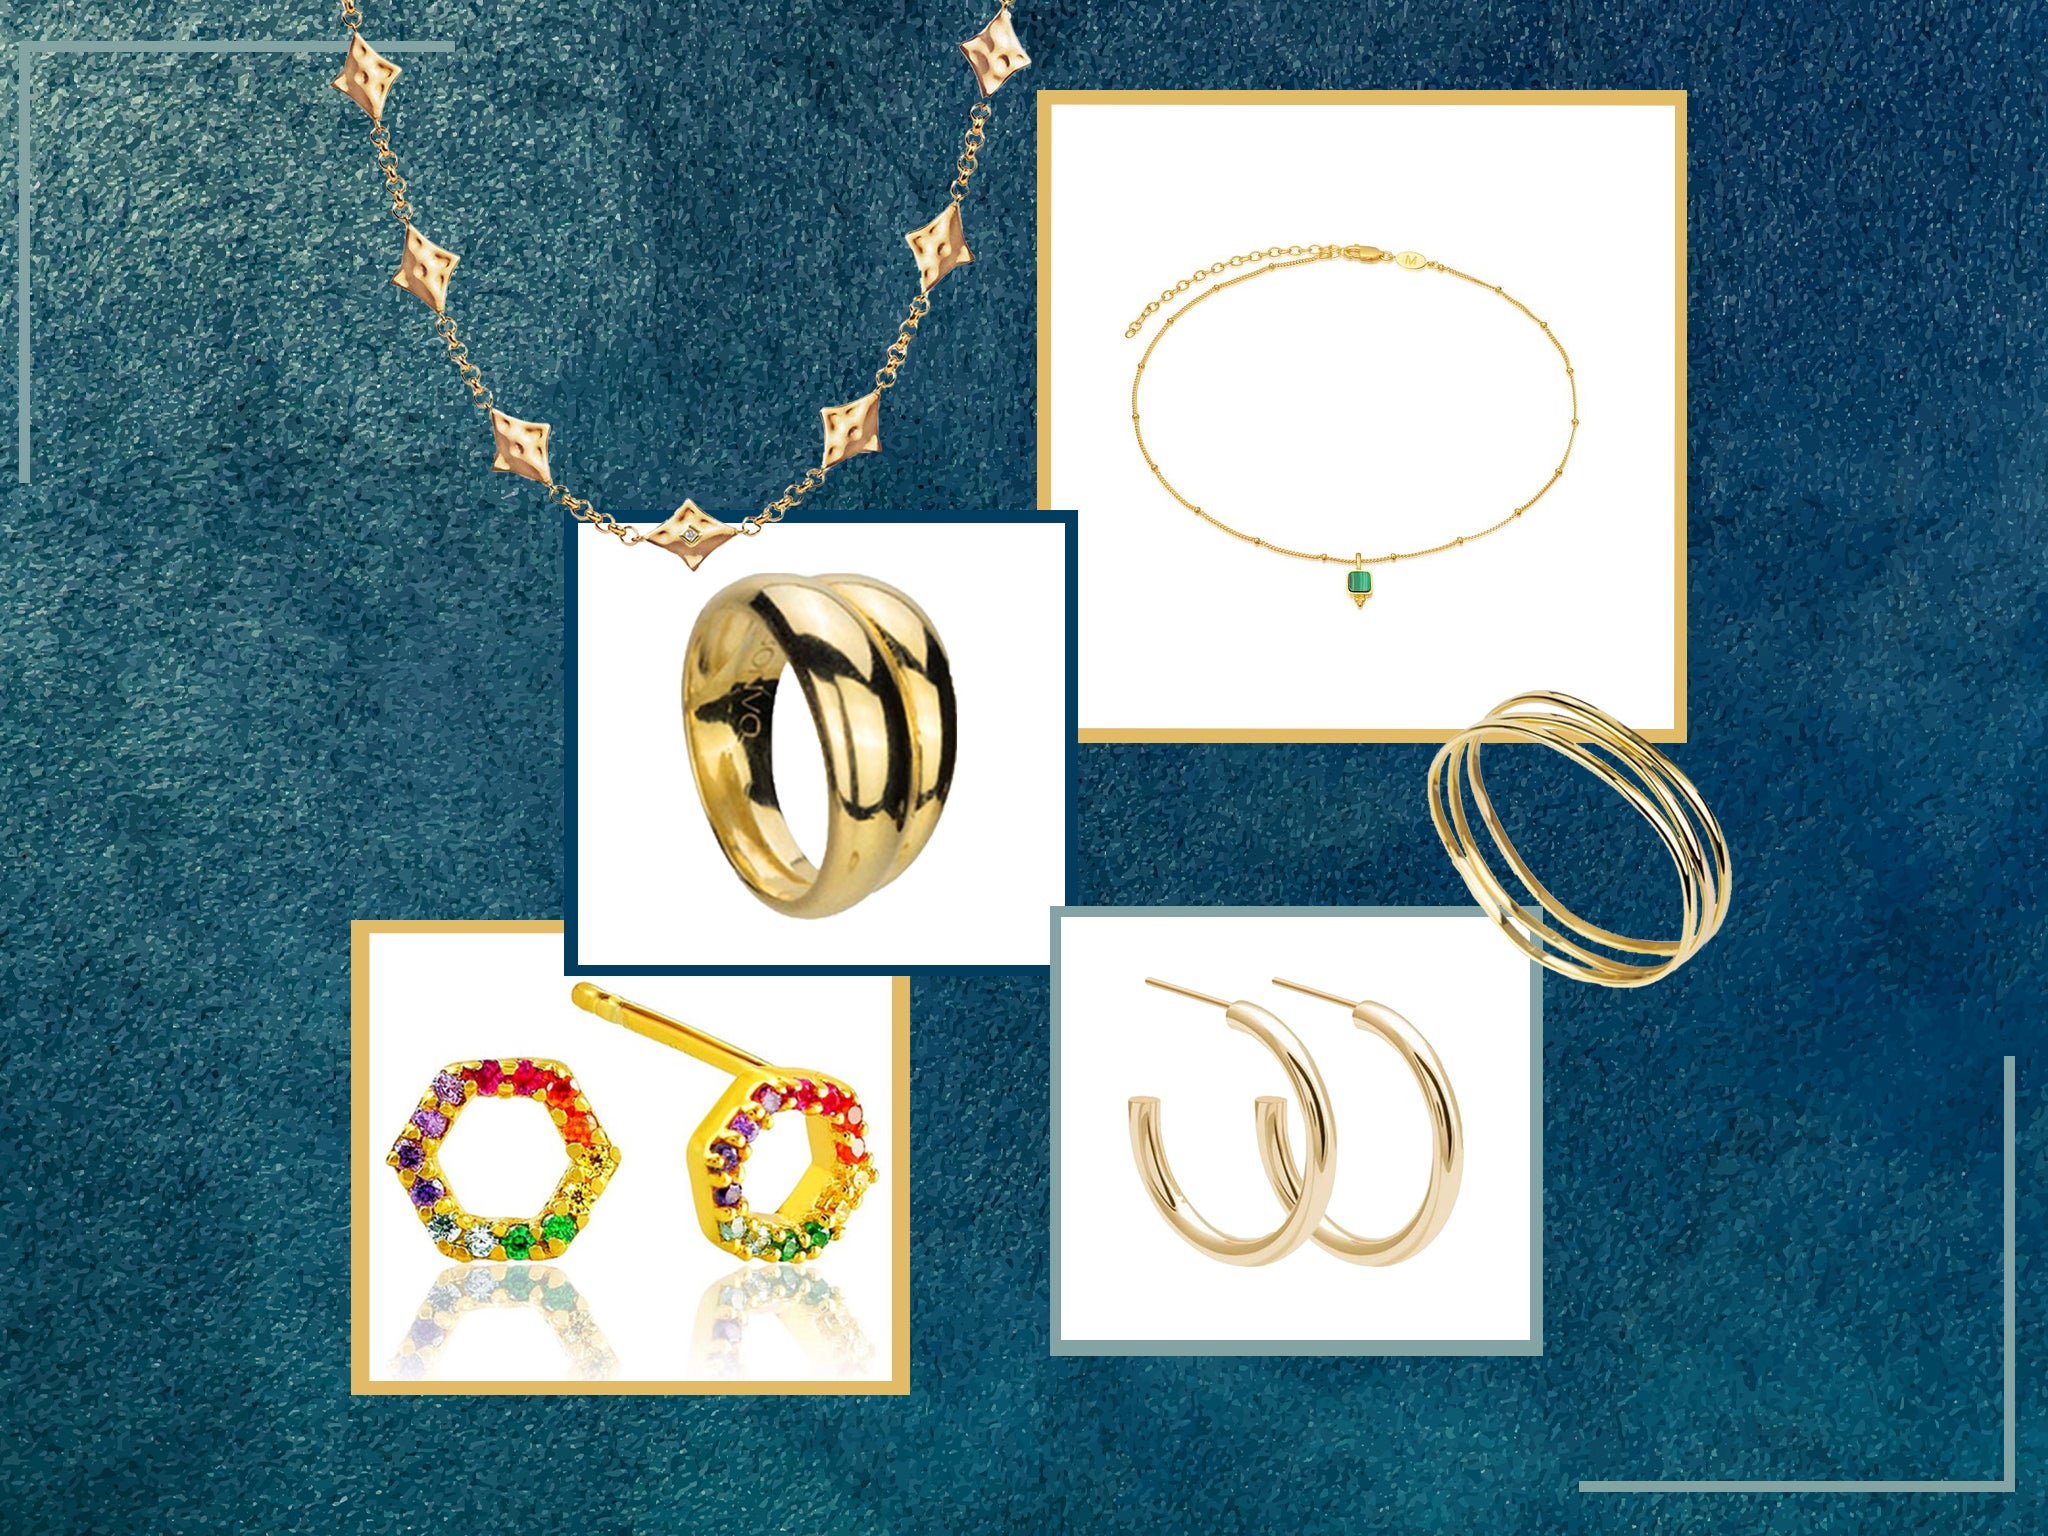 For gifts that will last a lifetime, jewellery is the perfect choice